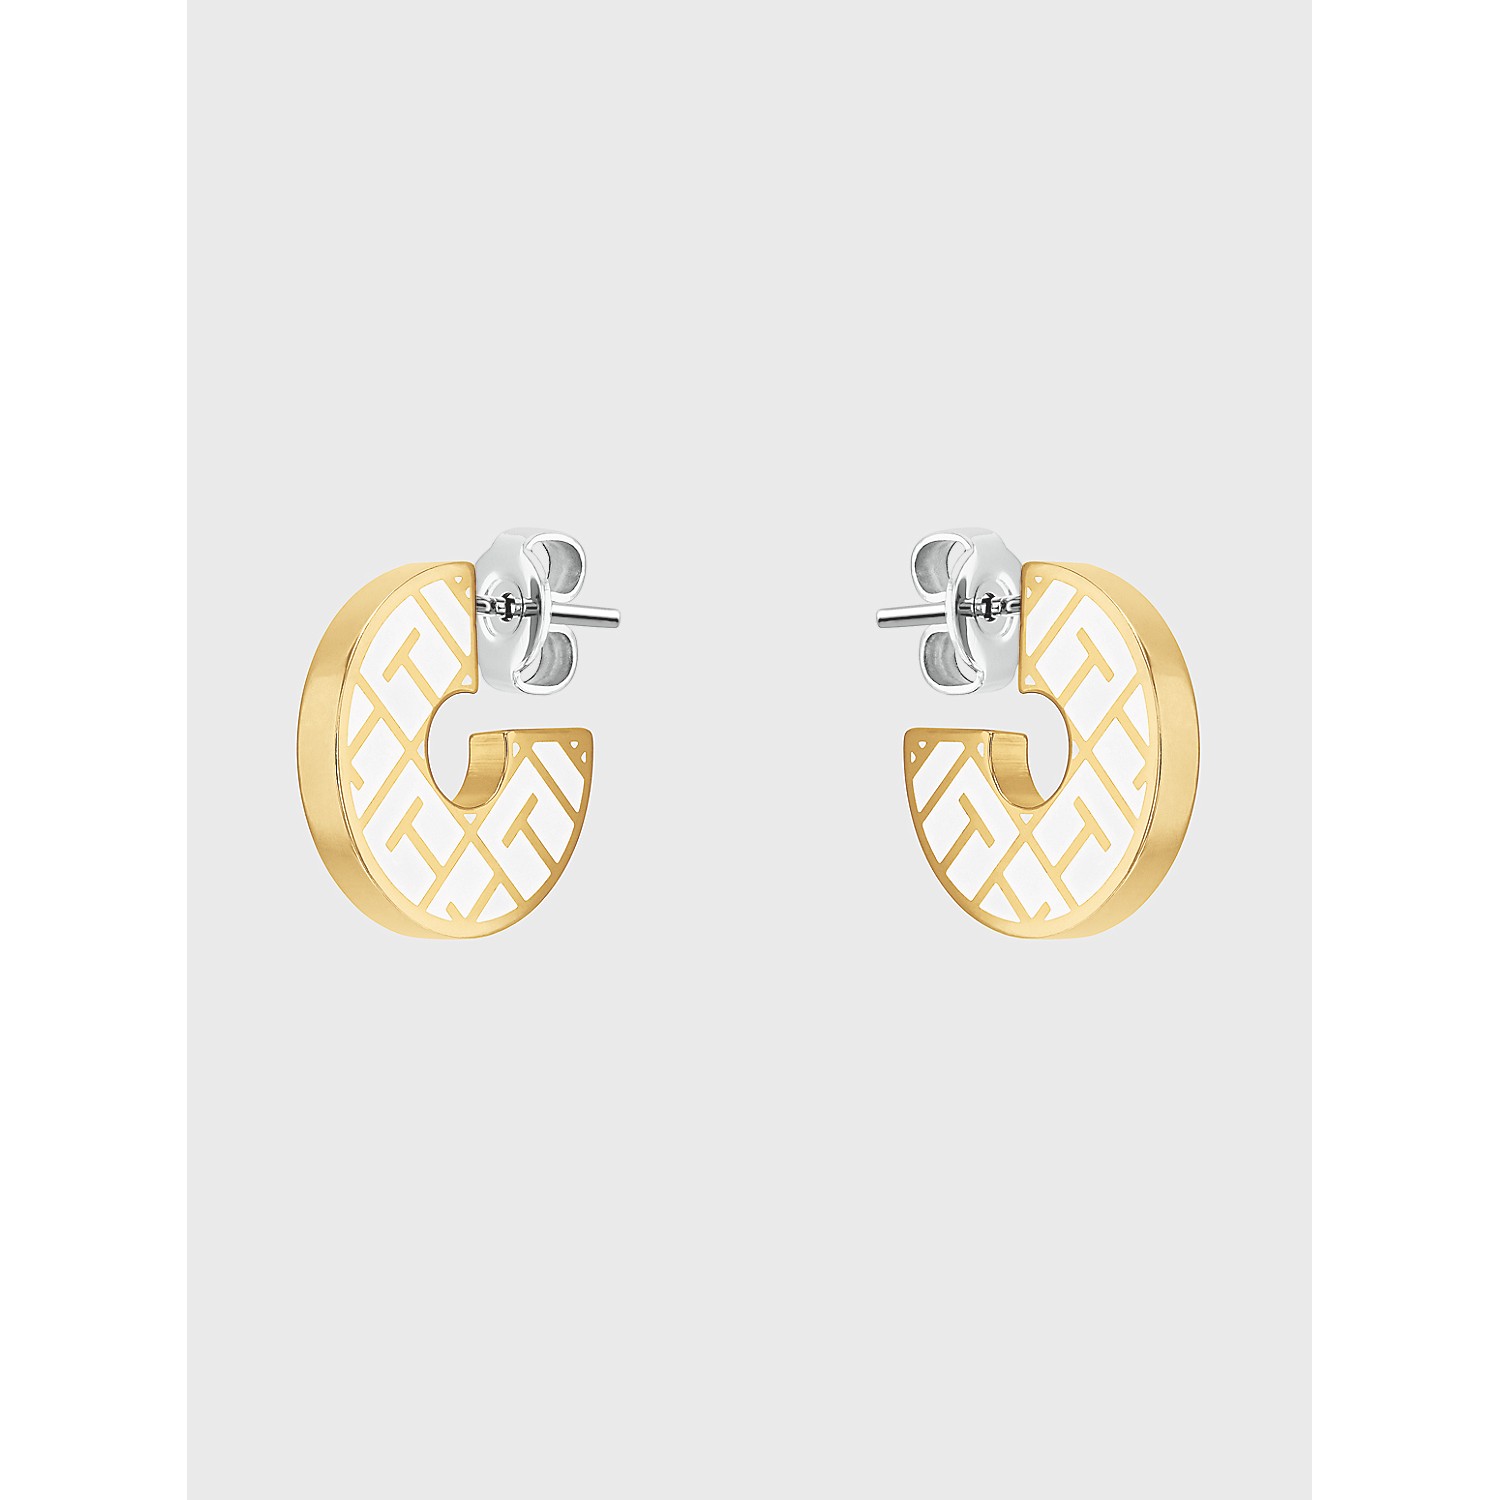 TOMMY HILFIGER Gold-Plated Monogram Earrings